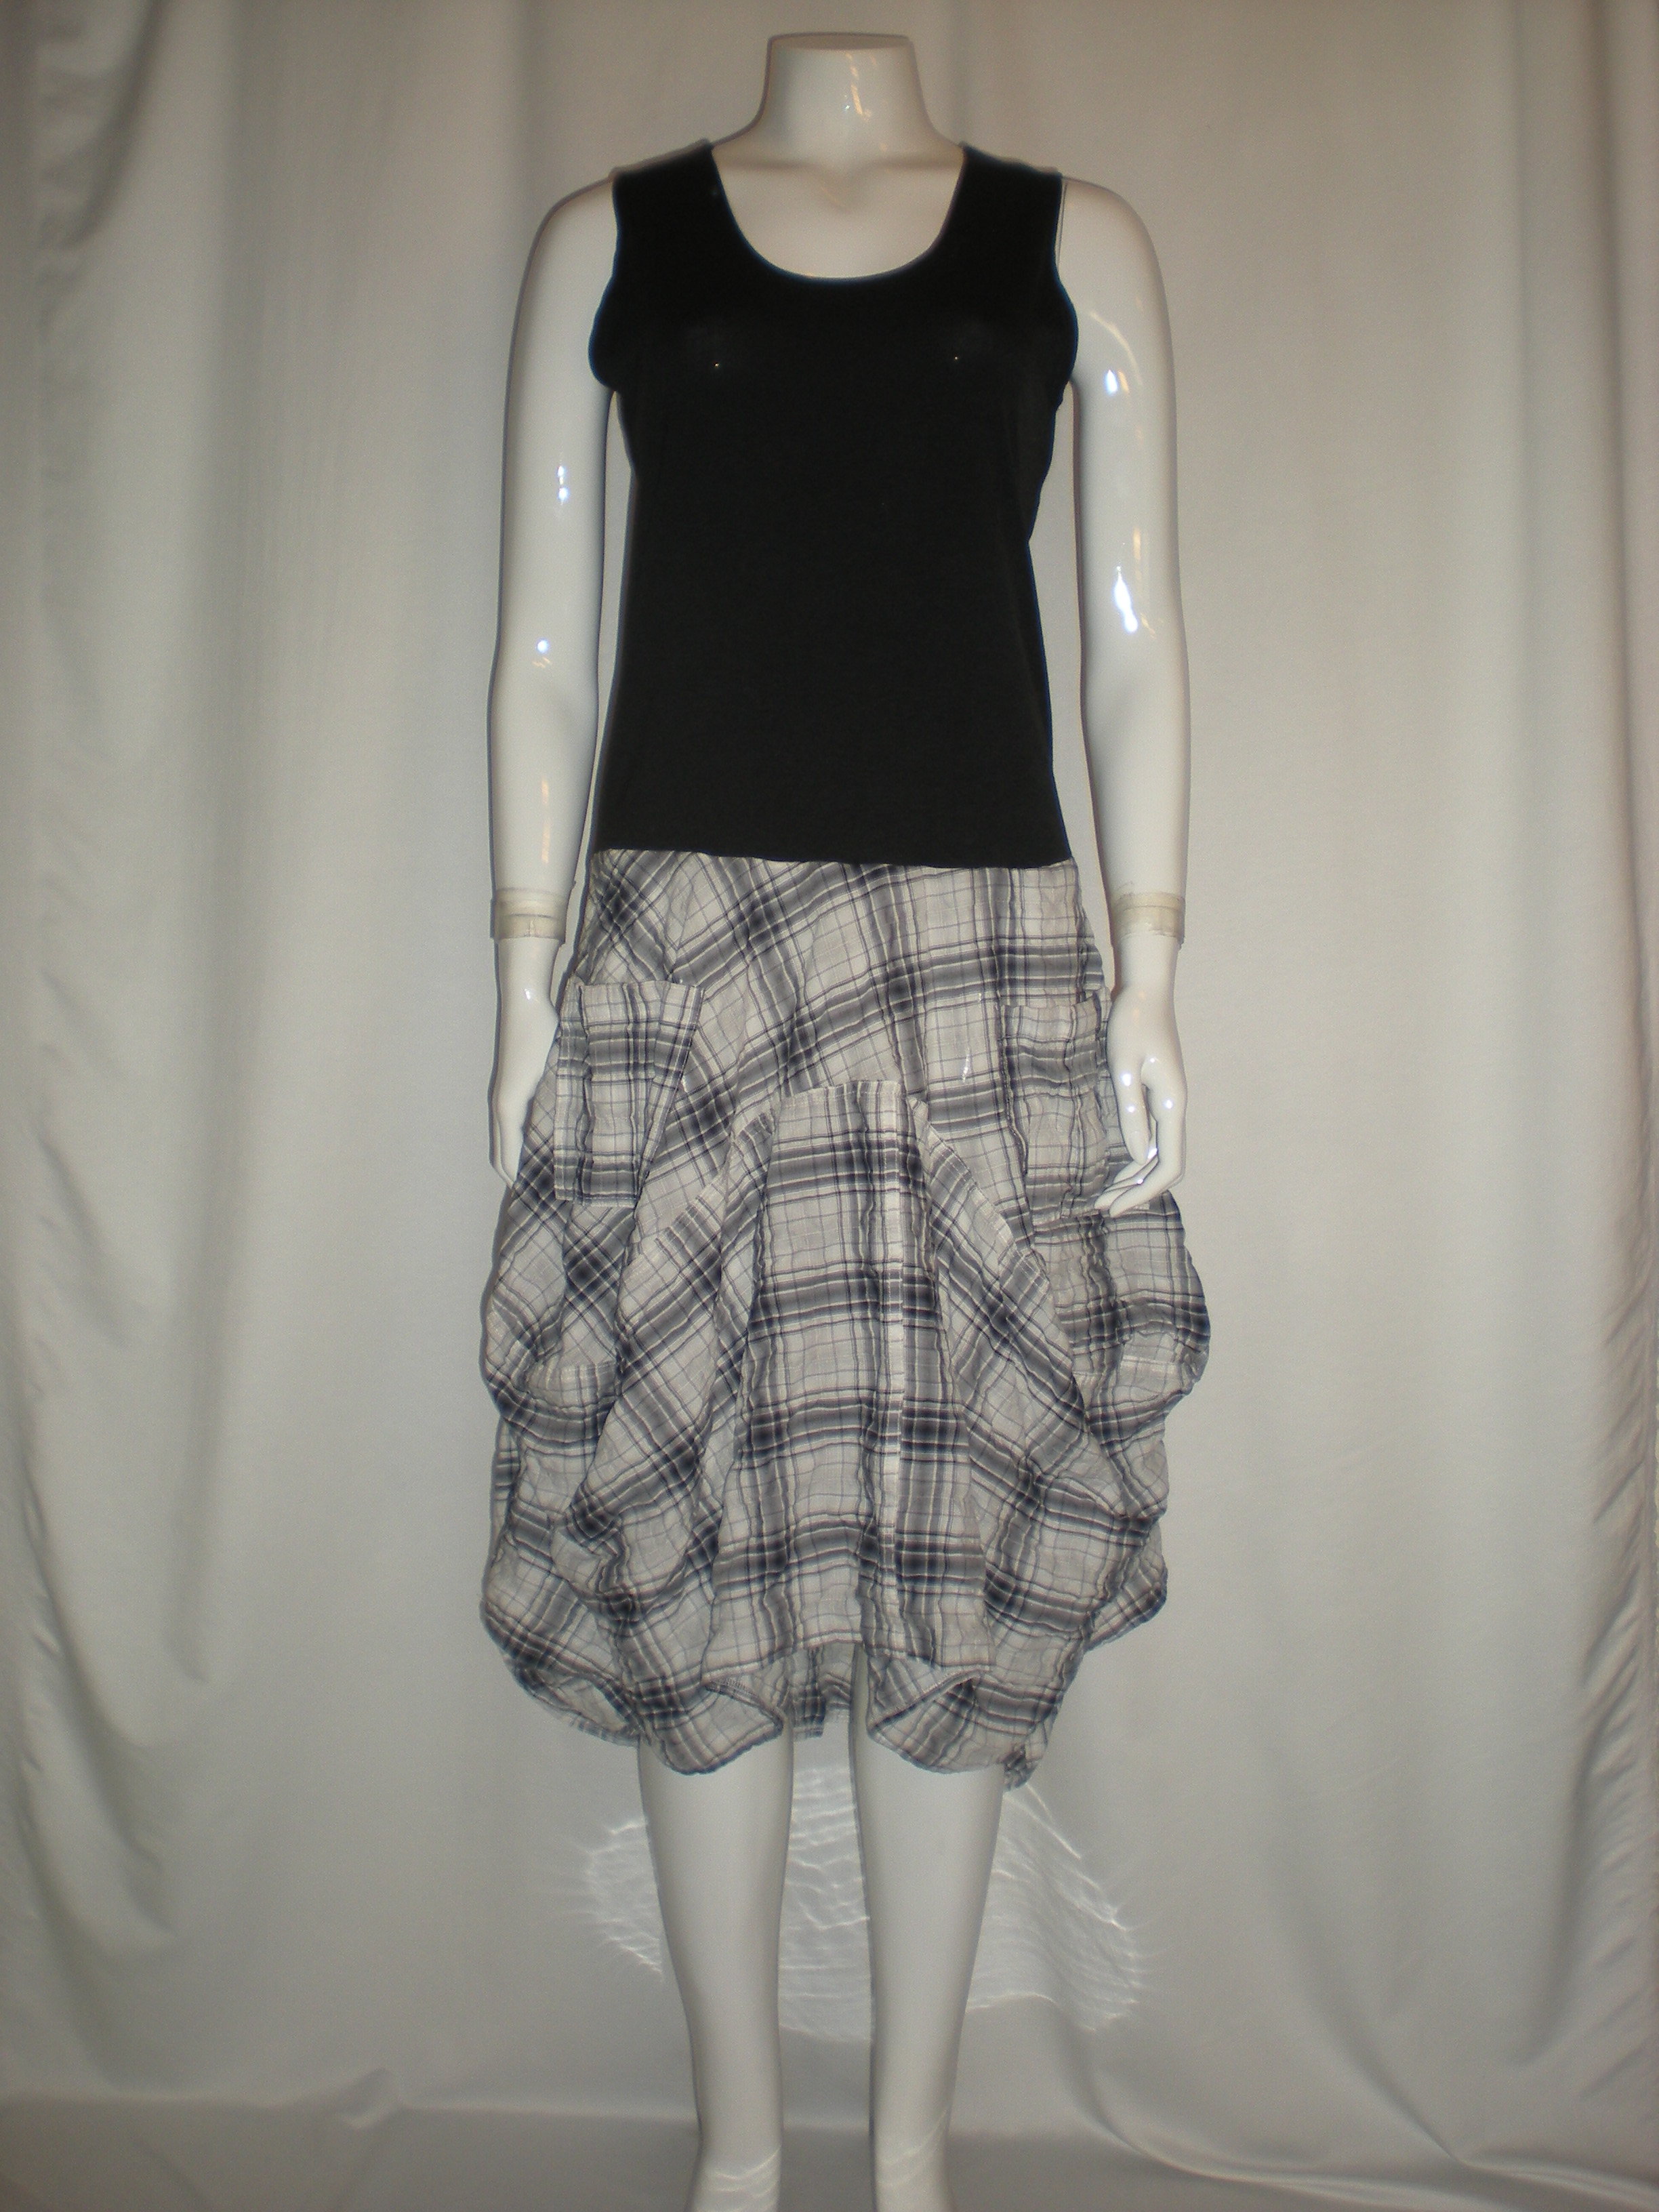 Style # 1012, Black Top Knit with Plaid bottom, Size 3 (Large)